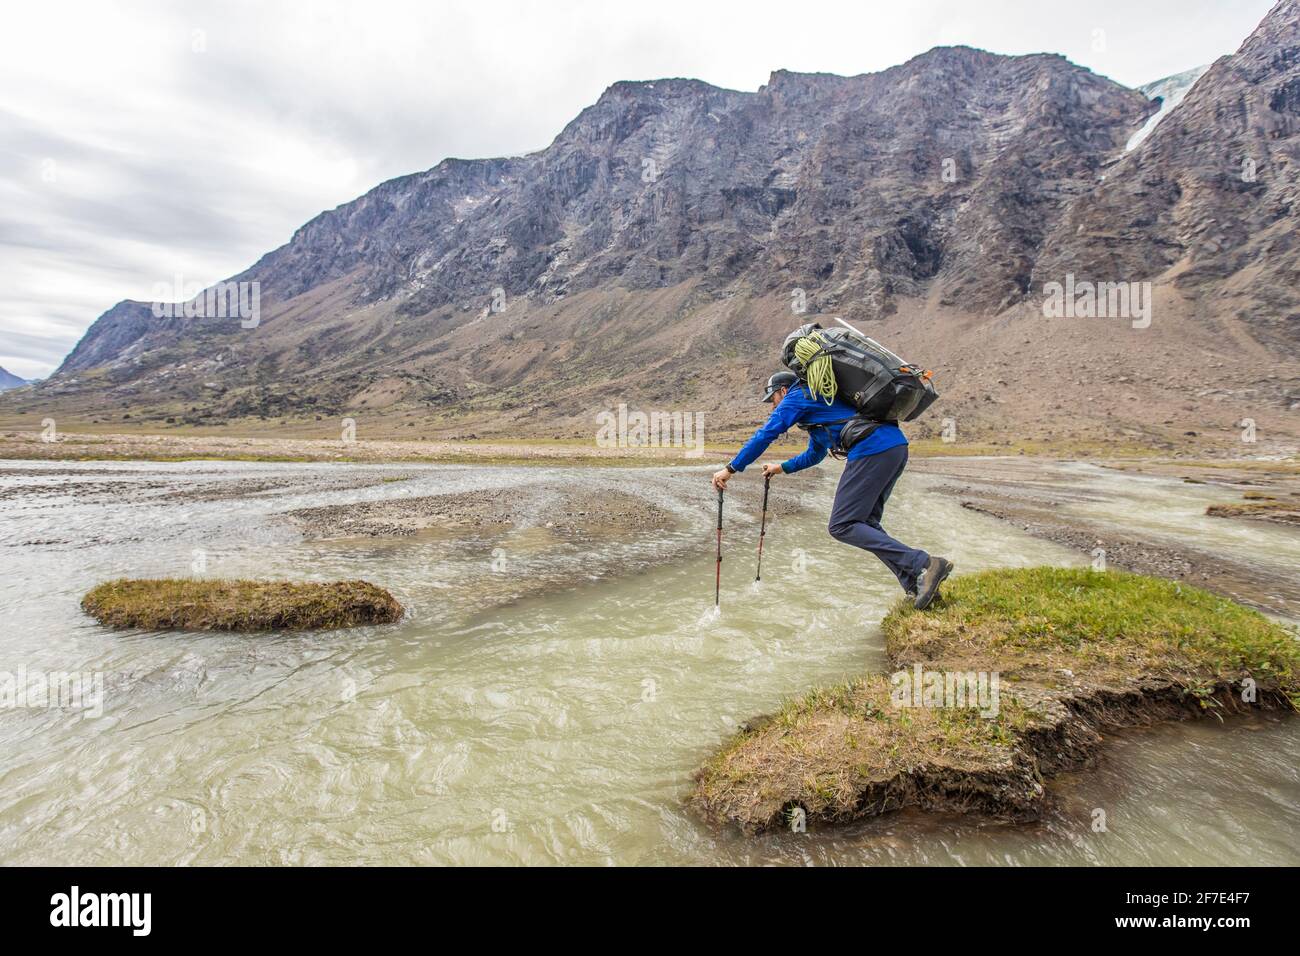 Backpacker uses trekking poles to leap across a deep river channel Stock Photo